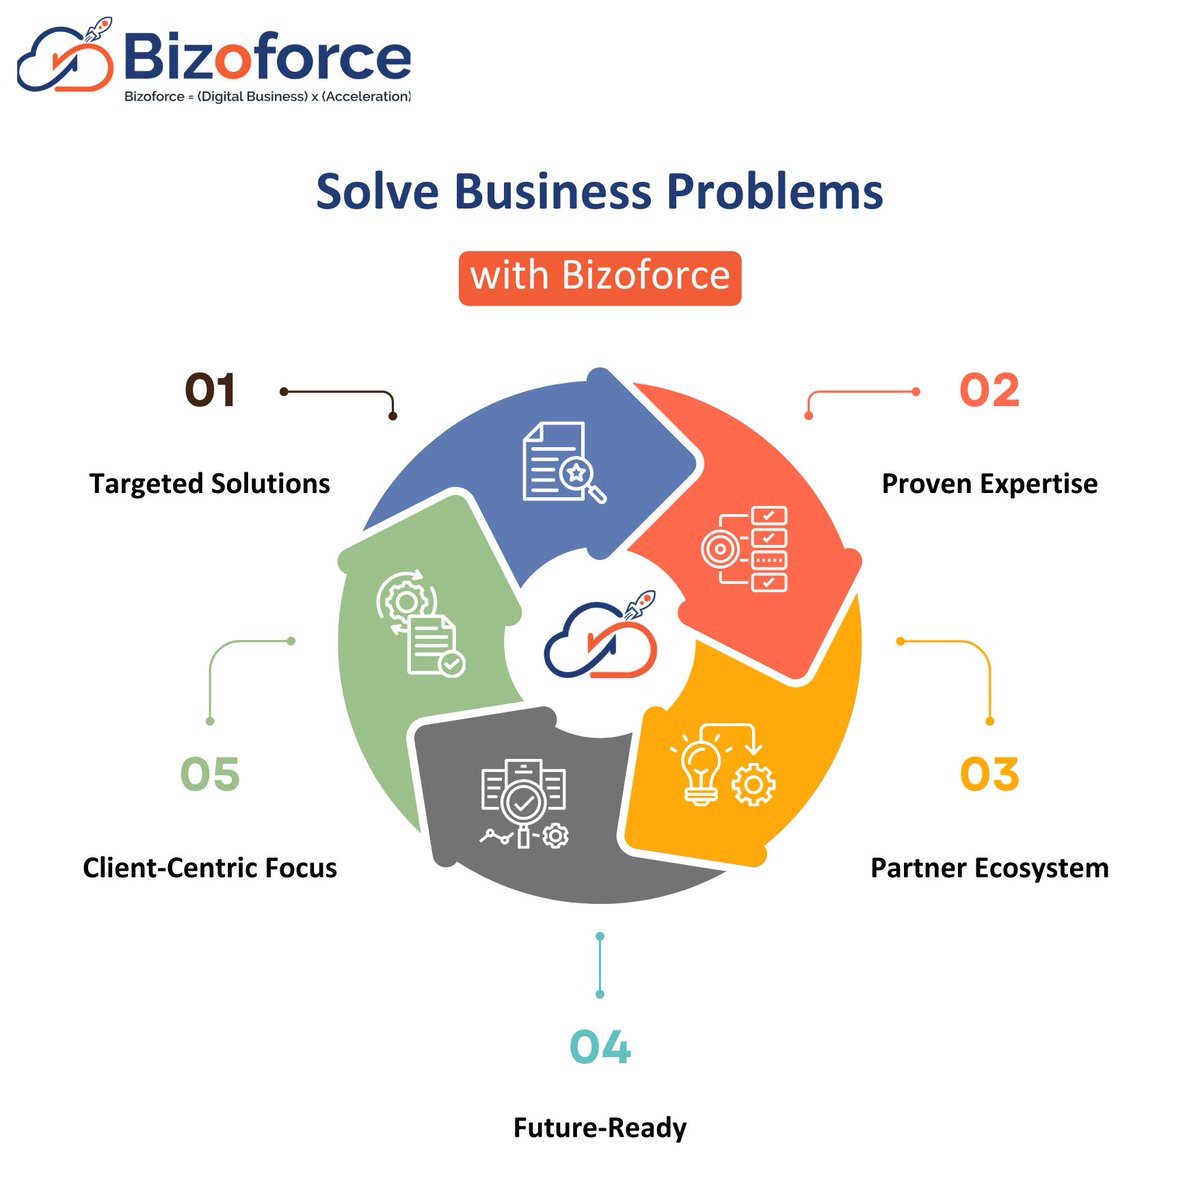 Don't just dream of a digital future, create it. Bizoforce delivers tailored solutions to solve your toughest business challenges, accelerate growth, and unlock new possibilities.

Visit Now - buff.ly/3XoJBpX

#Bizoforce #DigitalTransformation #BusinessSolutions